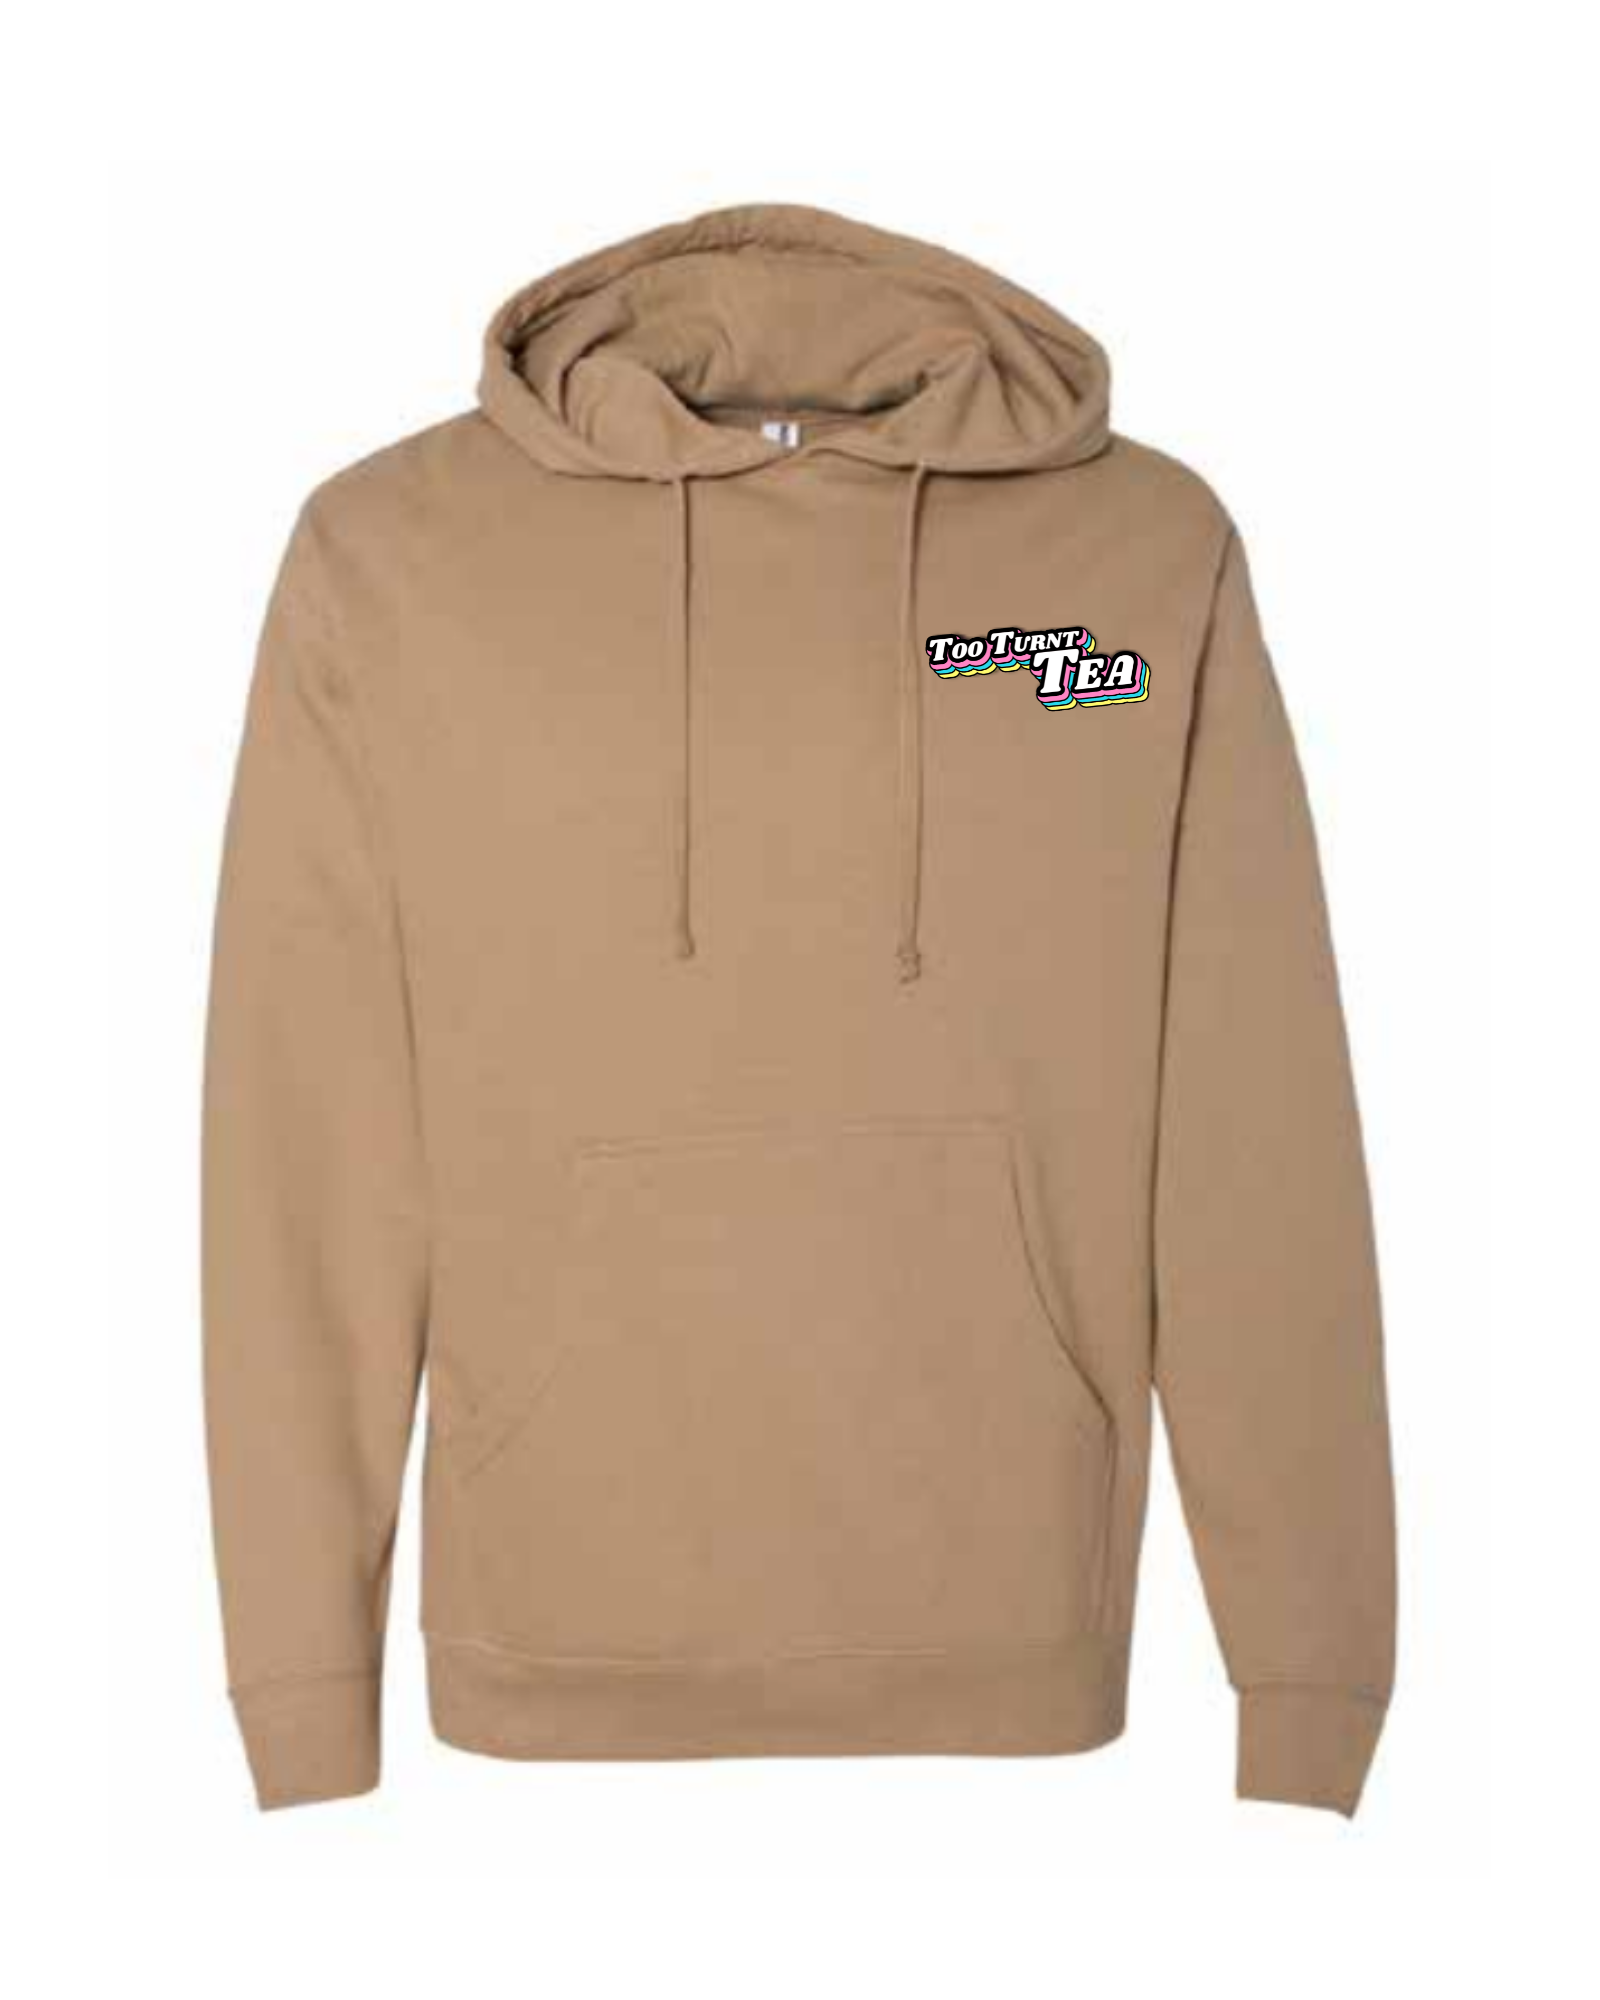 Sh!t Hoodie - Sand (CLOSEOUT)